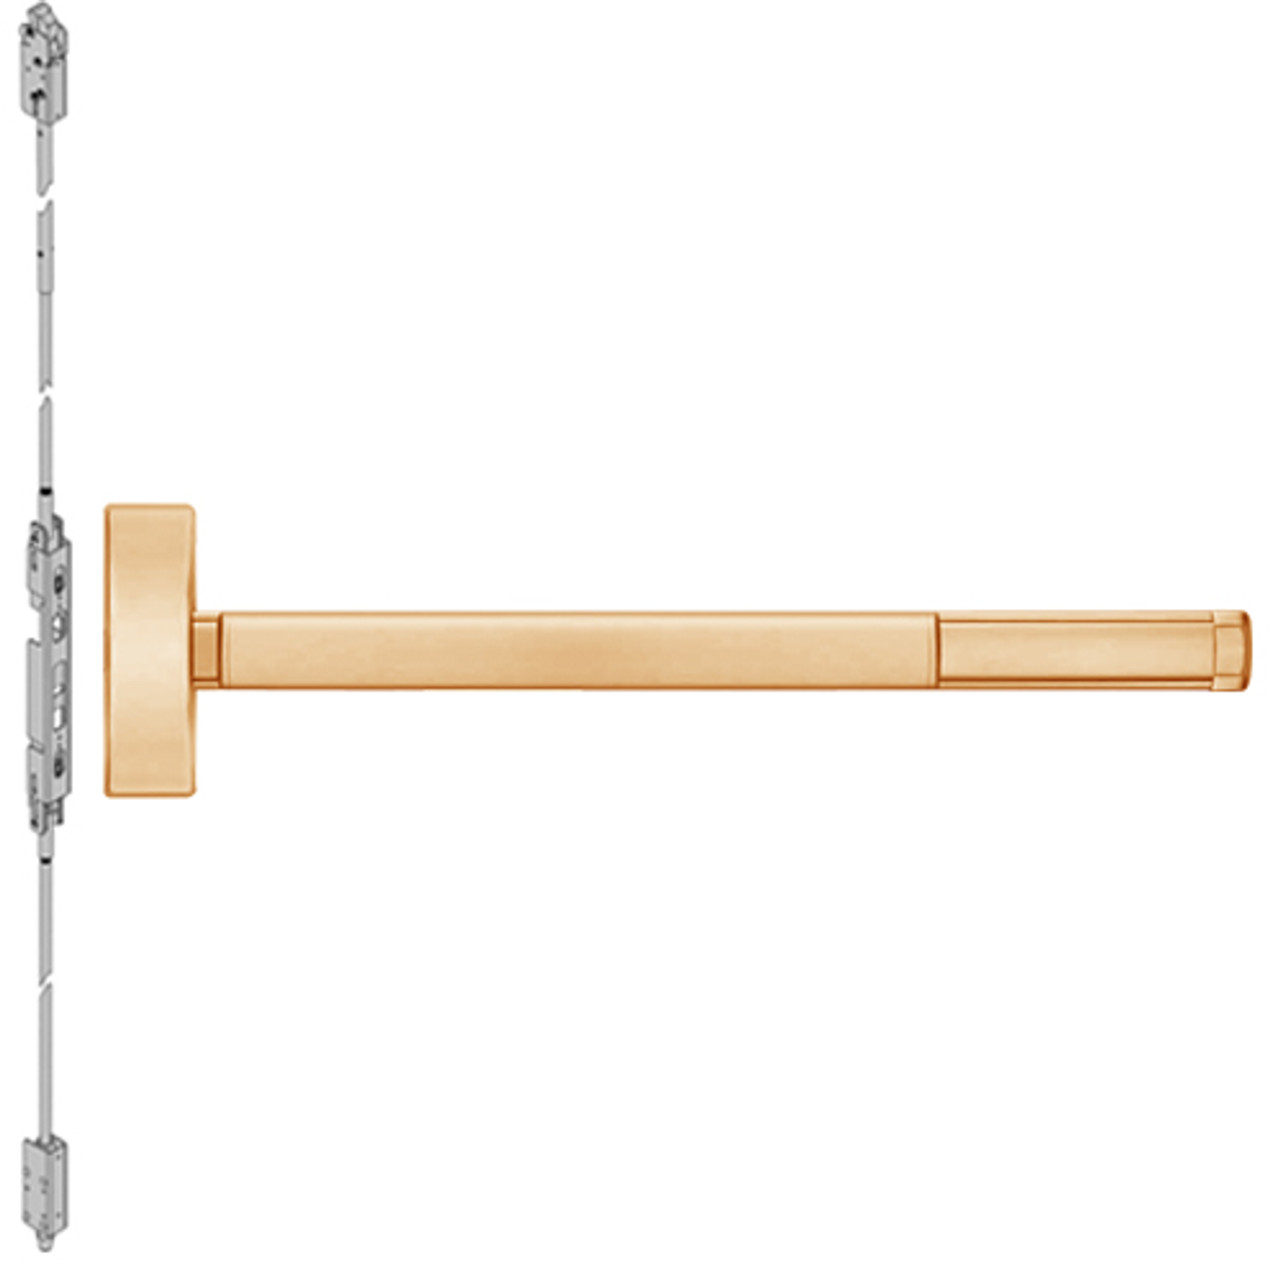 TSFL2805LBR-612-36 PHI 2800 Series Fire Rated Concealed Vertical Rod Exit Device with Touchbar Monitoring Switch Prepped for Key Controls Thumb Piece in Satin Bronze Finish